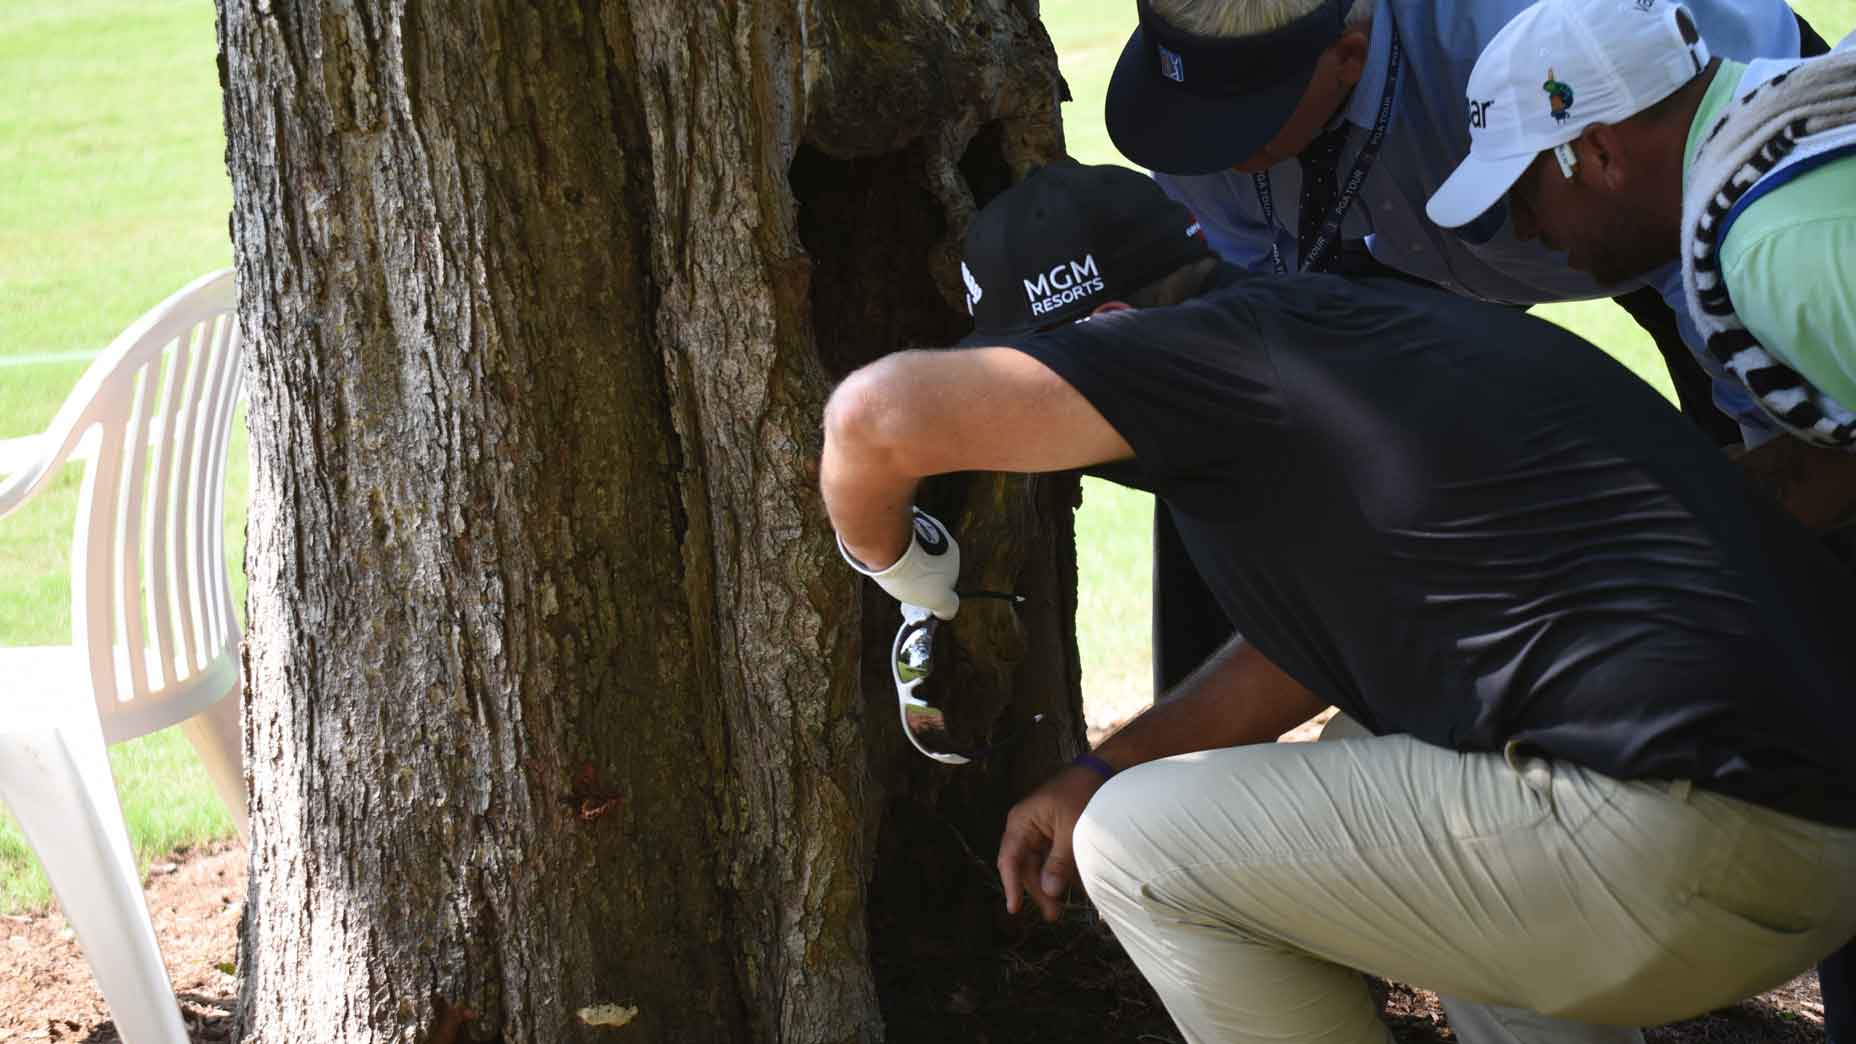 Can you take free relief from an animal's hole in a tree?